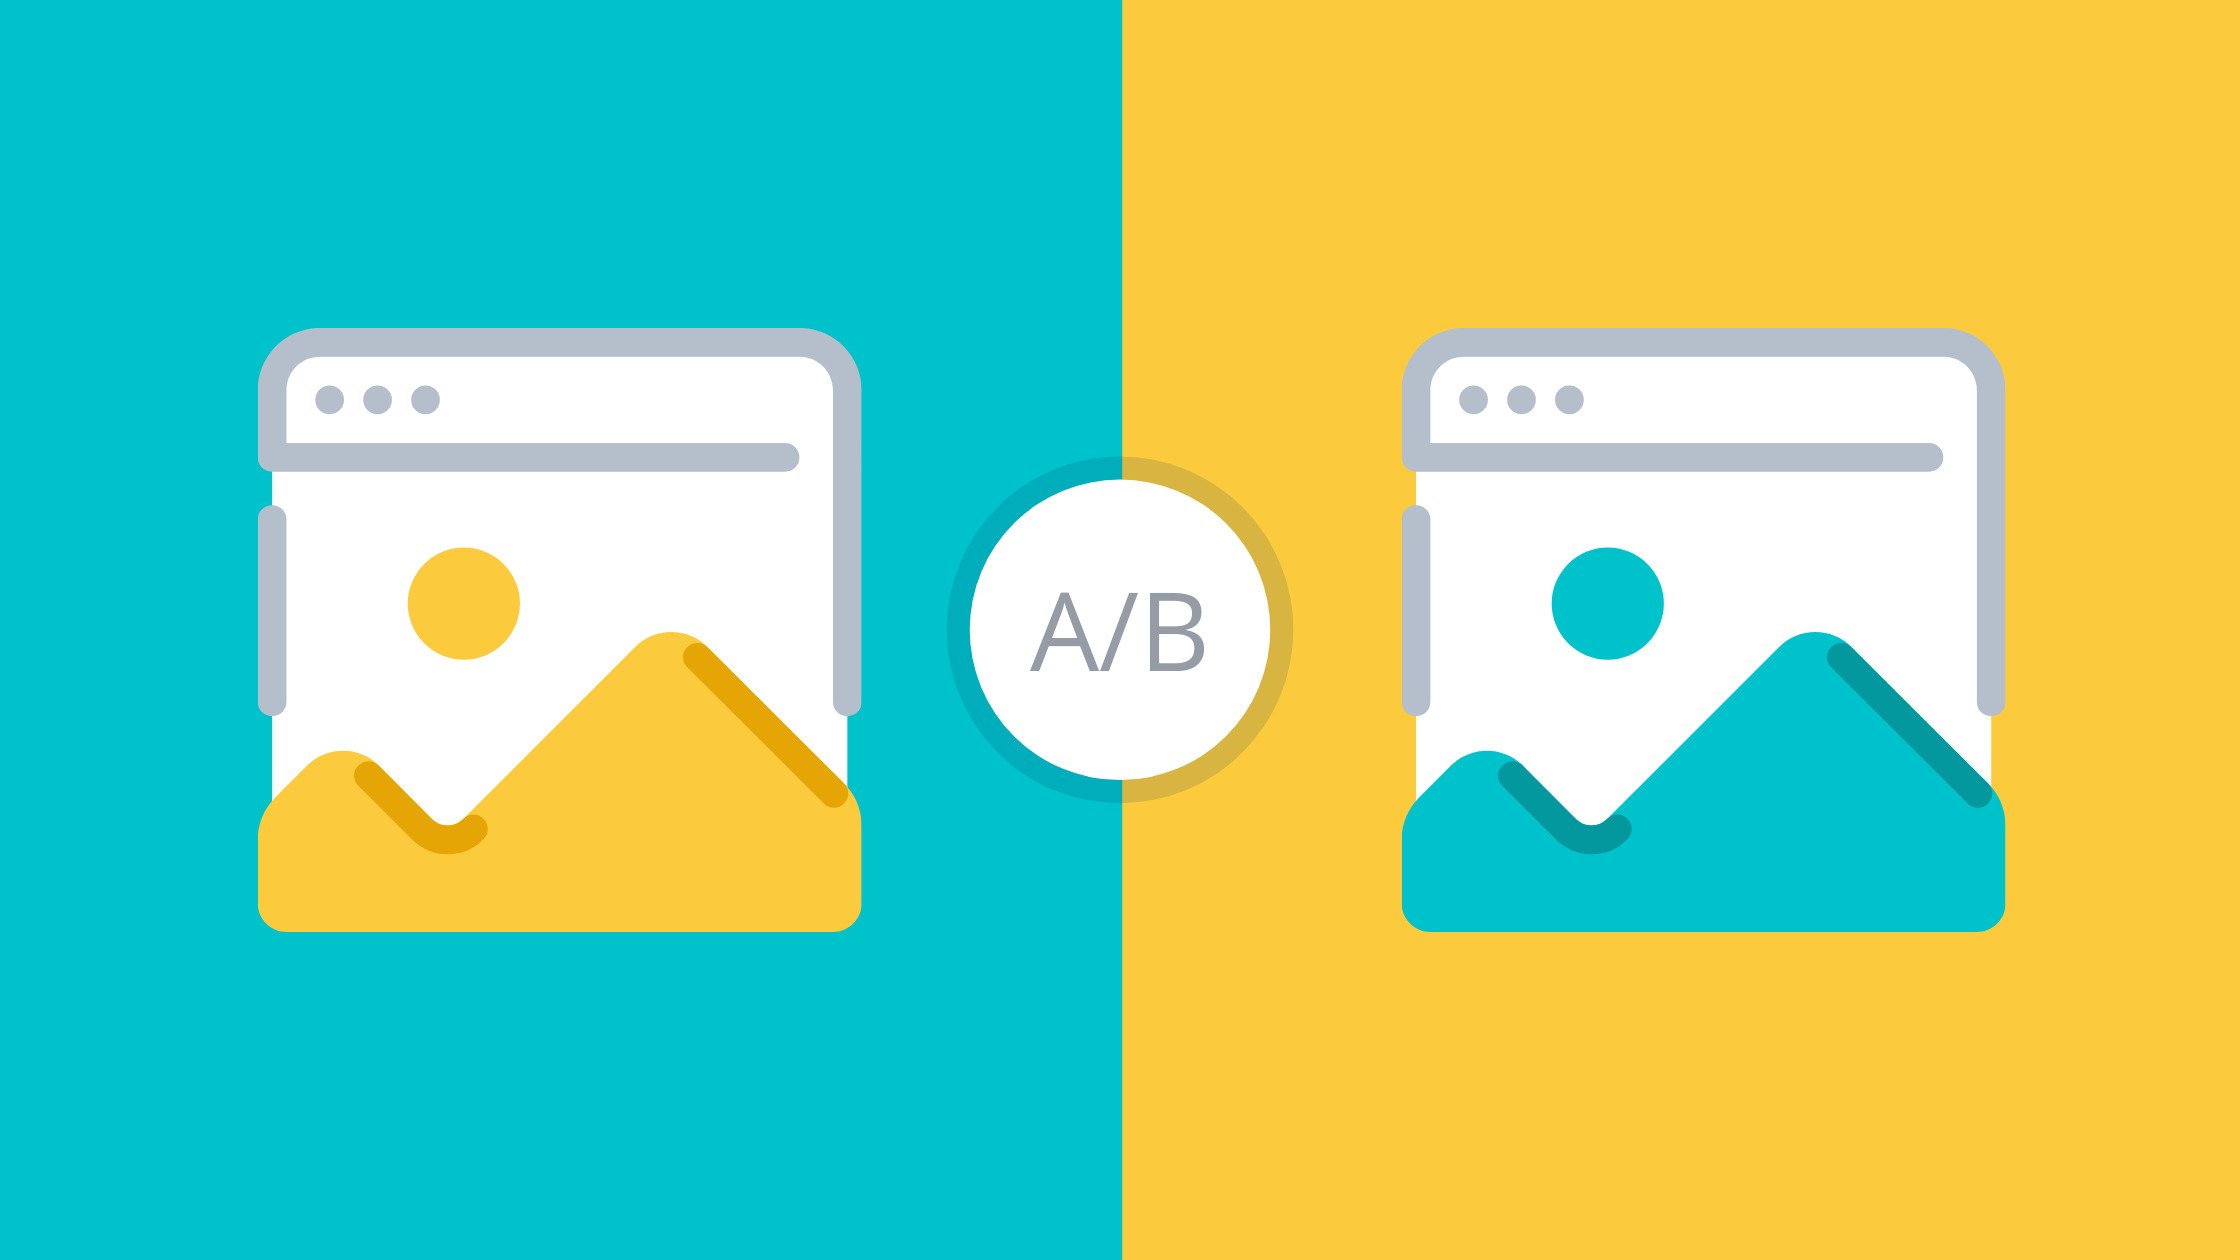 How to Run an Effective A/B Test on Your Ecommerce Website